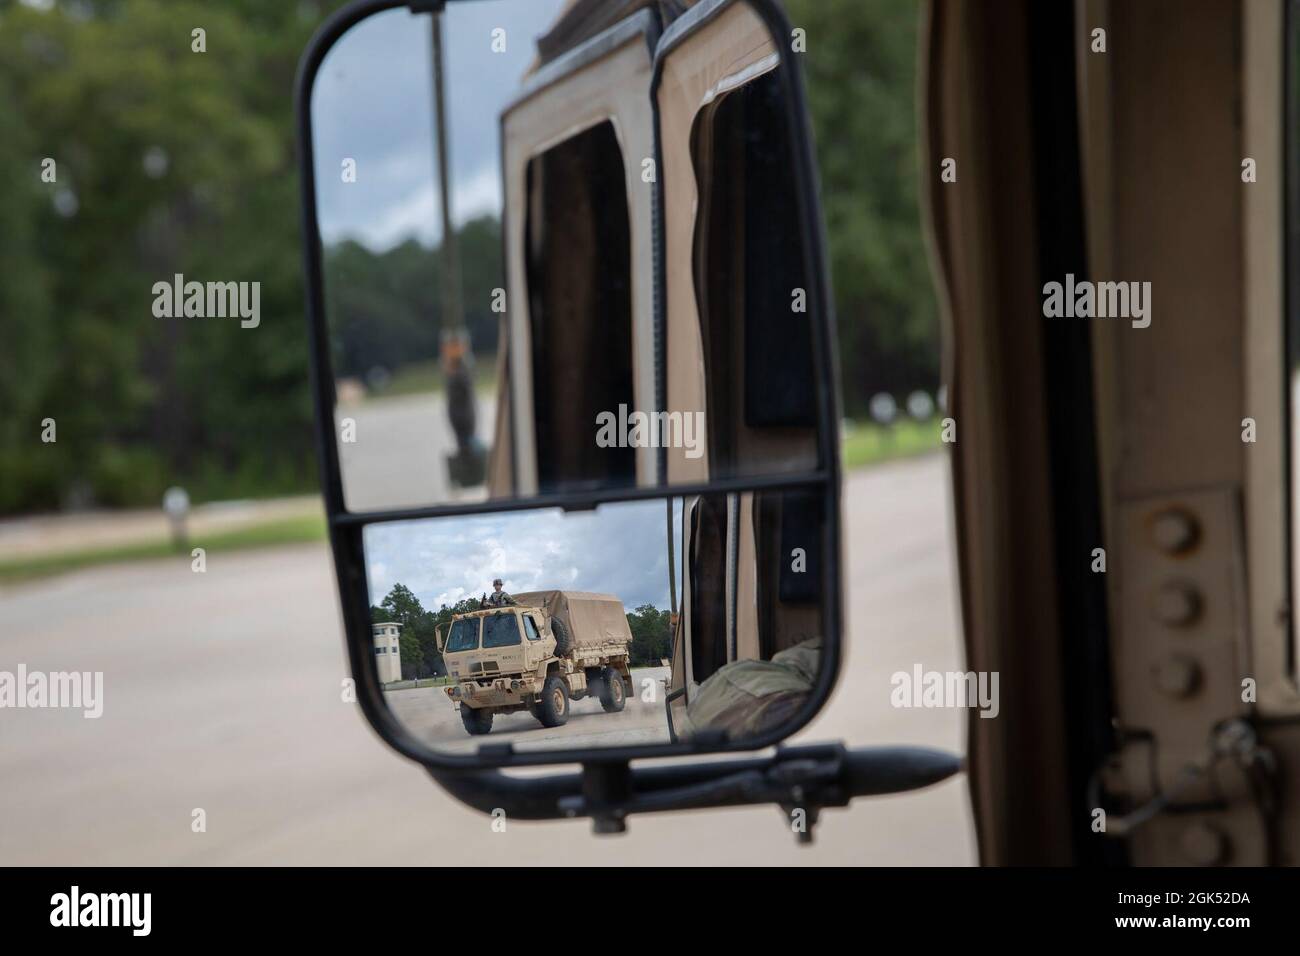 The Soldiers of the 2nd Battalion, 3rd General Support Aviation Battalion, 3rd Combat Aviation Brigade, 3rd Infantry Division, stage their medium tactical vehicles during a convoy live fire exercise at Fort Stewart, Georgia, August 3. The battalion conducted the exercise to train their mission essential tasks which allows them to maintain unit readiness and lethality. Stock Photo